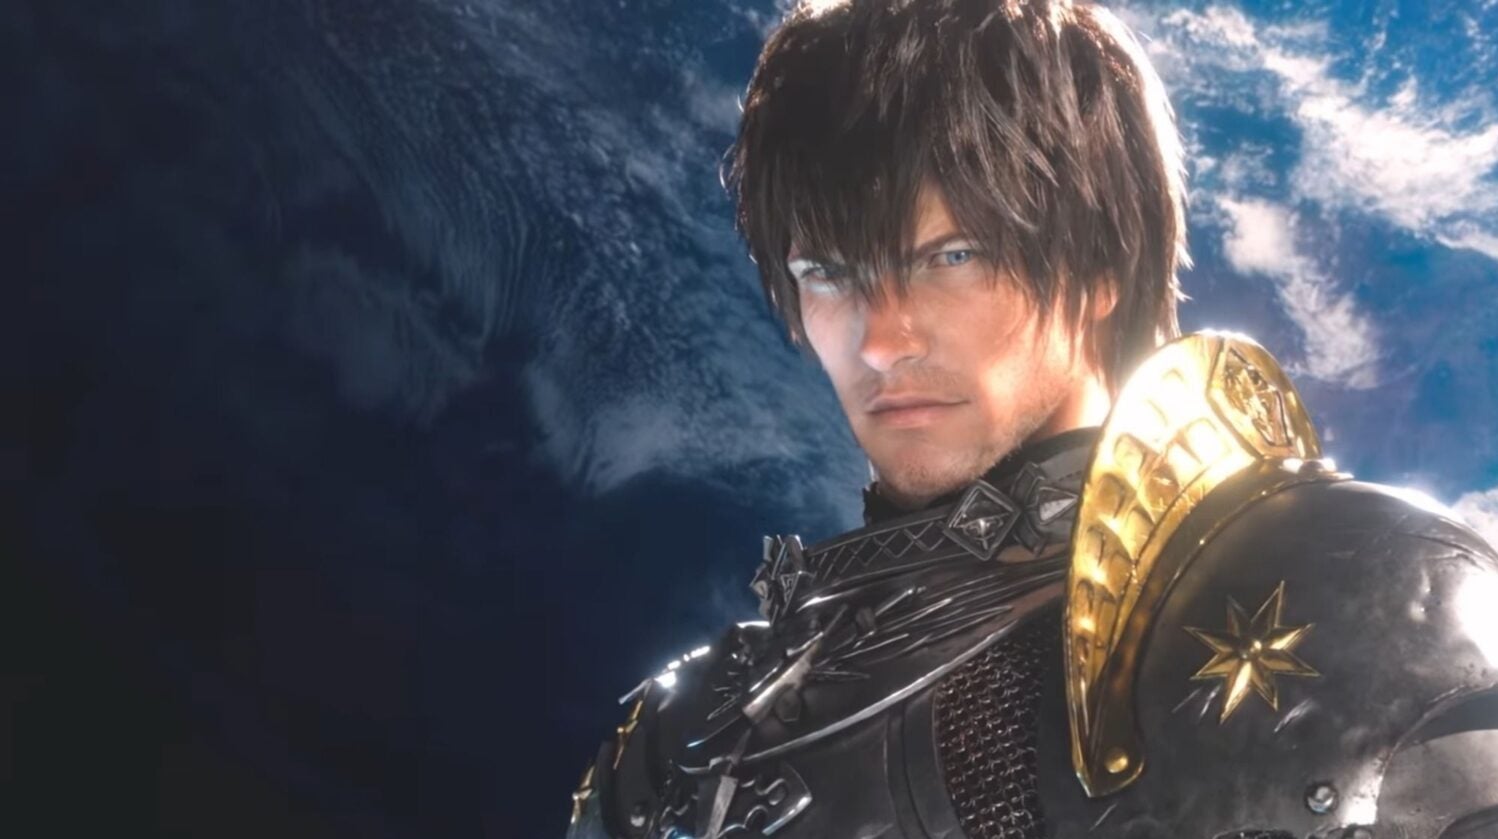 Image for Square Enix promises extra free game time for those long Final Fantasy 14 Endwalker queues